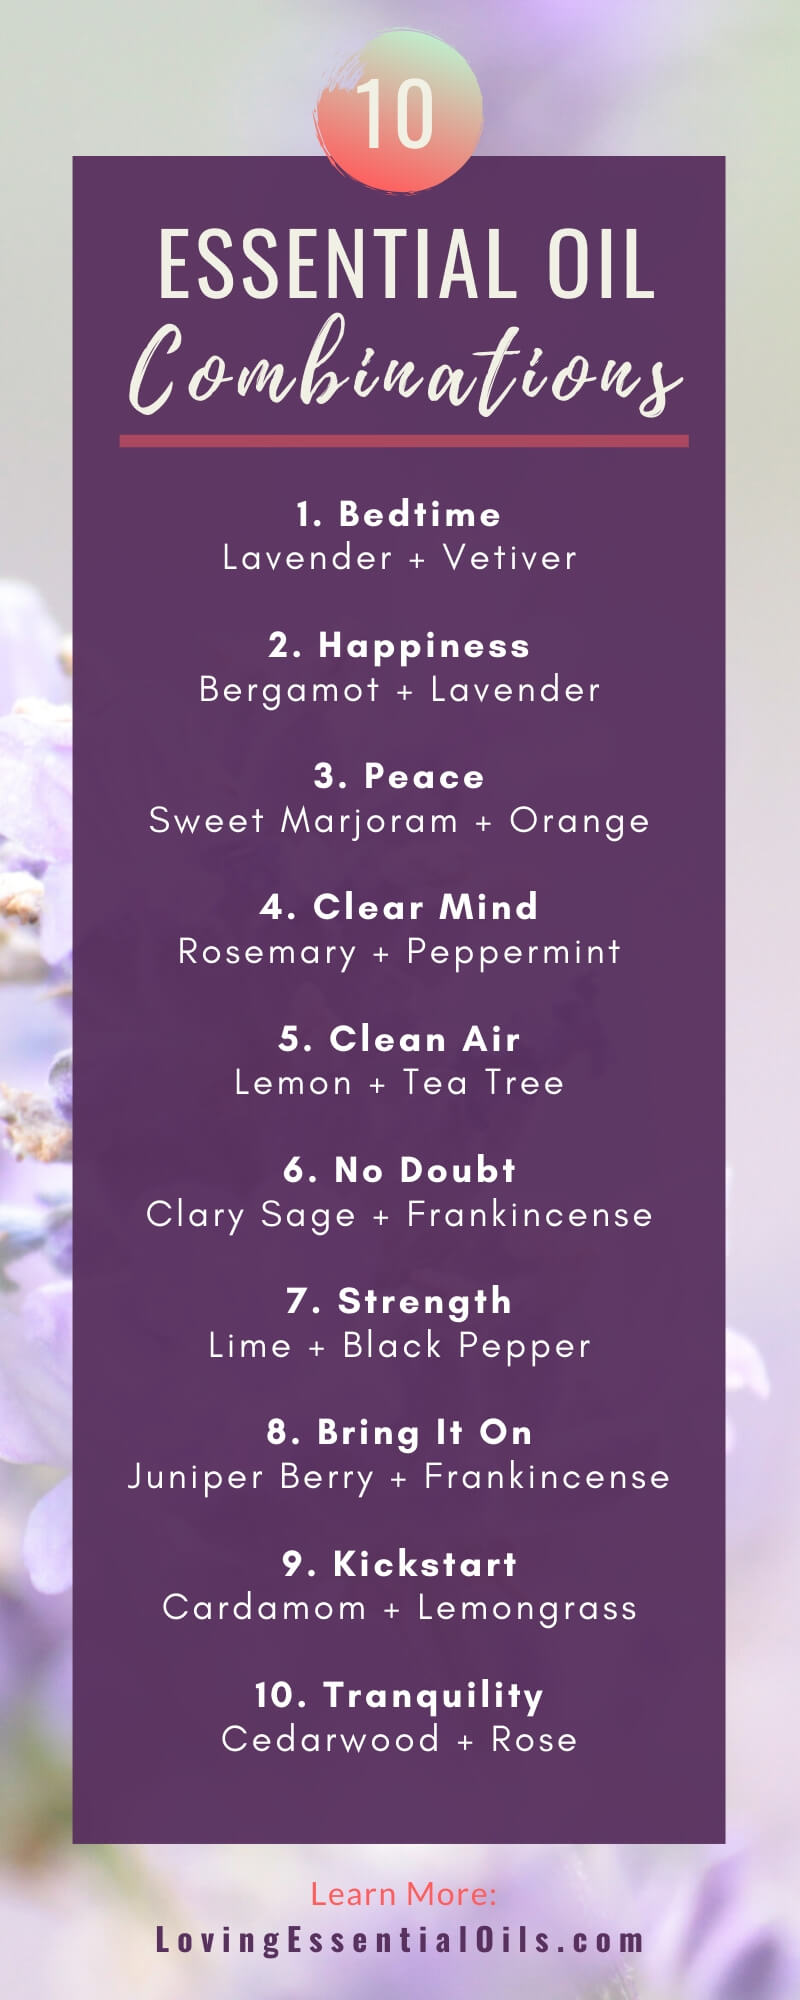 Best Essential Oils Combinations For Aromatherapy Diffusers by Loving Essential Oils | Pinterest Infographic